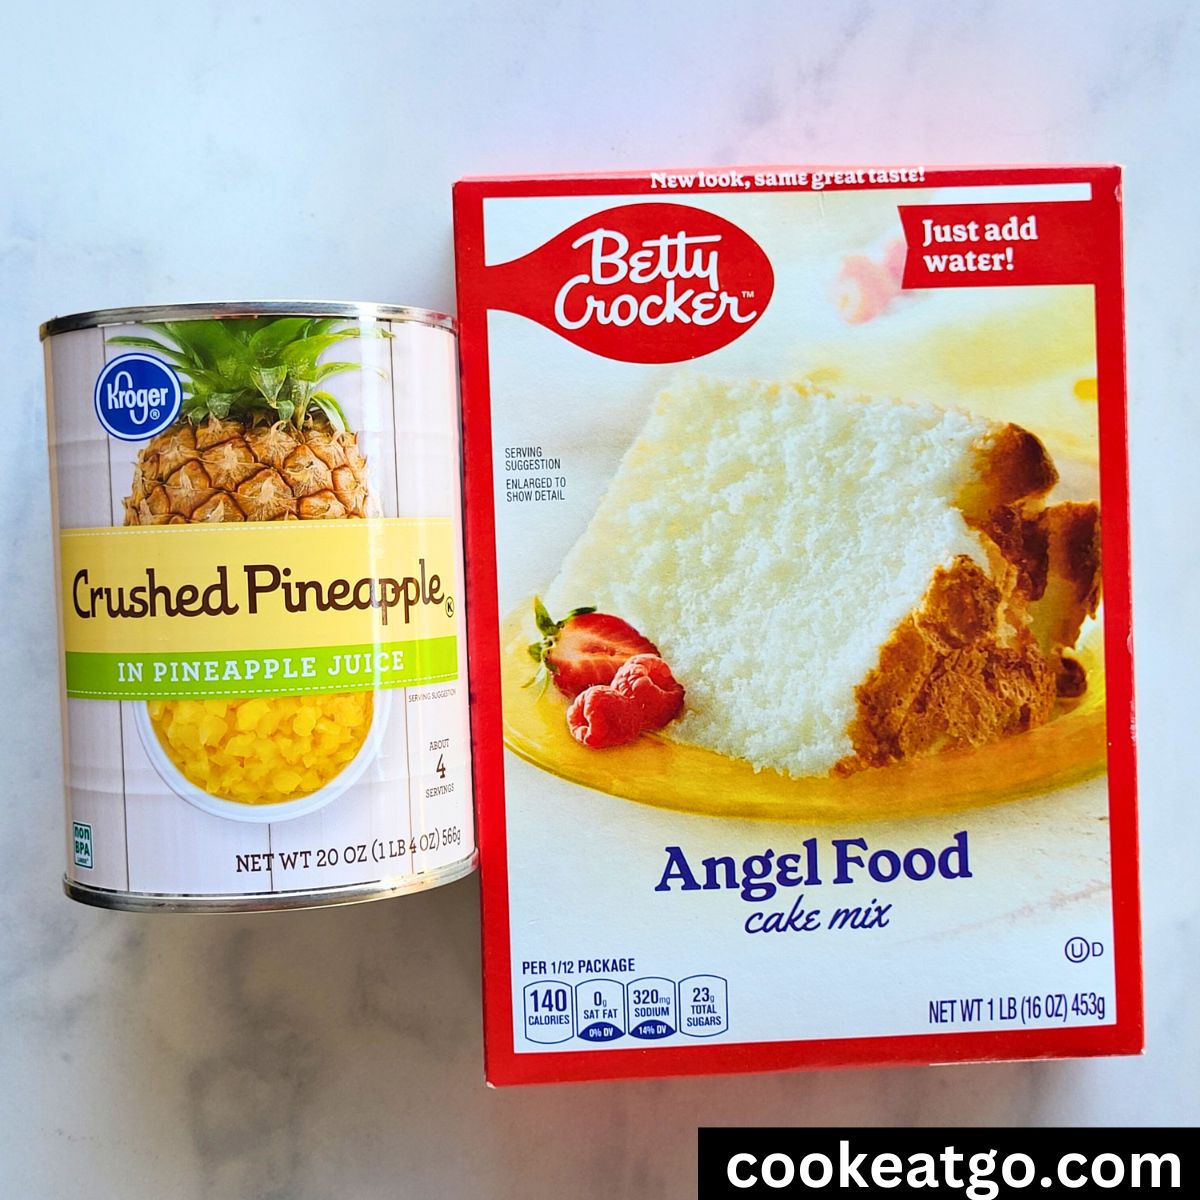 Can of crushed pineapple next to a box of angel food cake mix